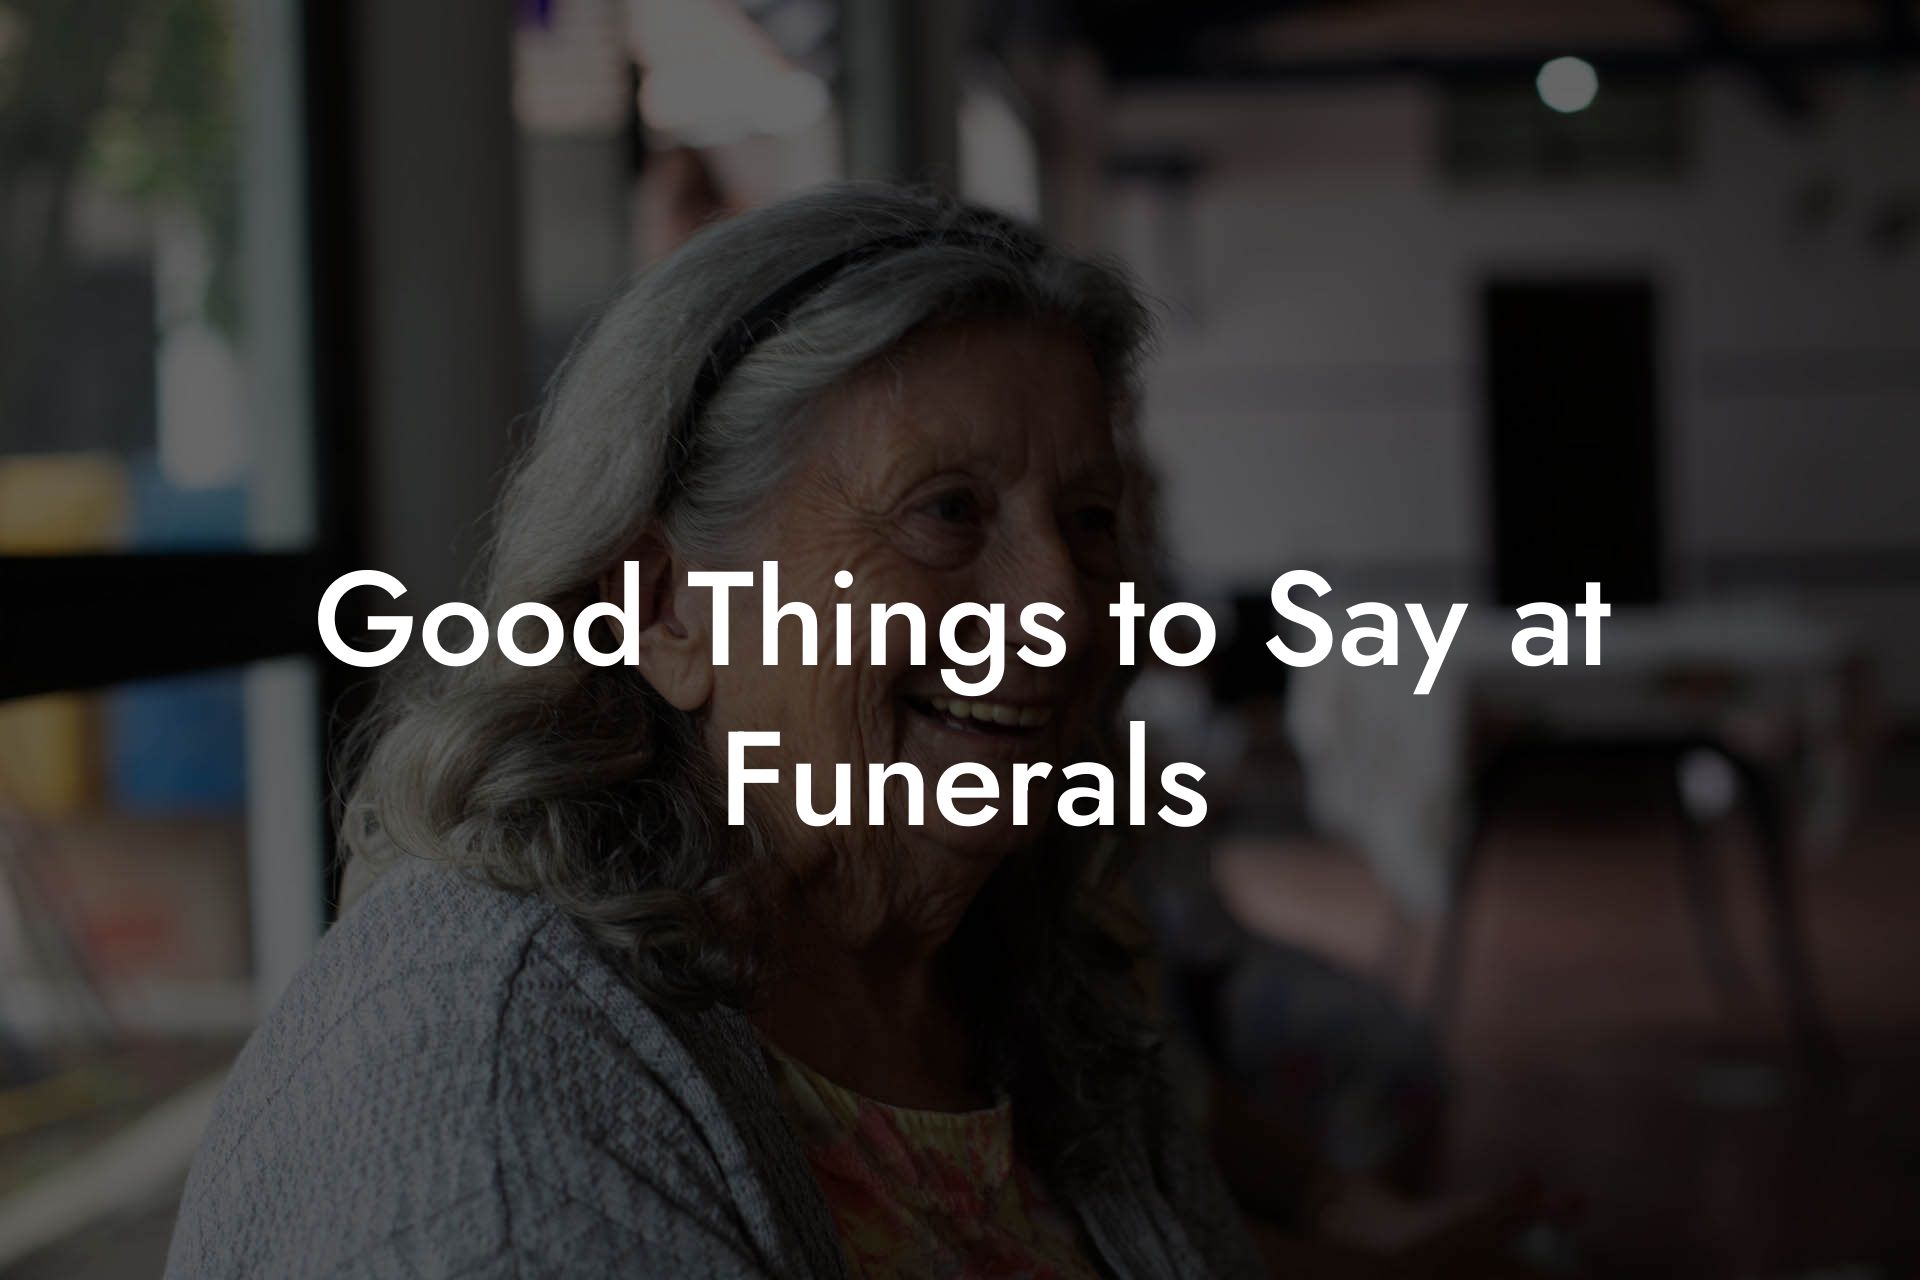 Good Things to Say at Funerals